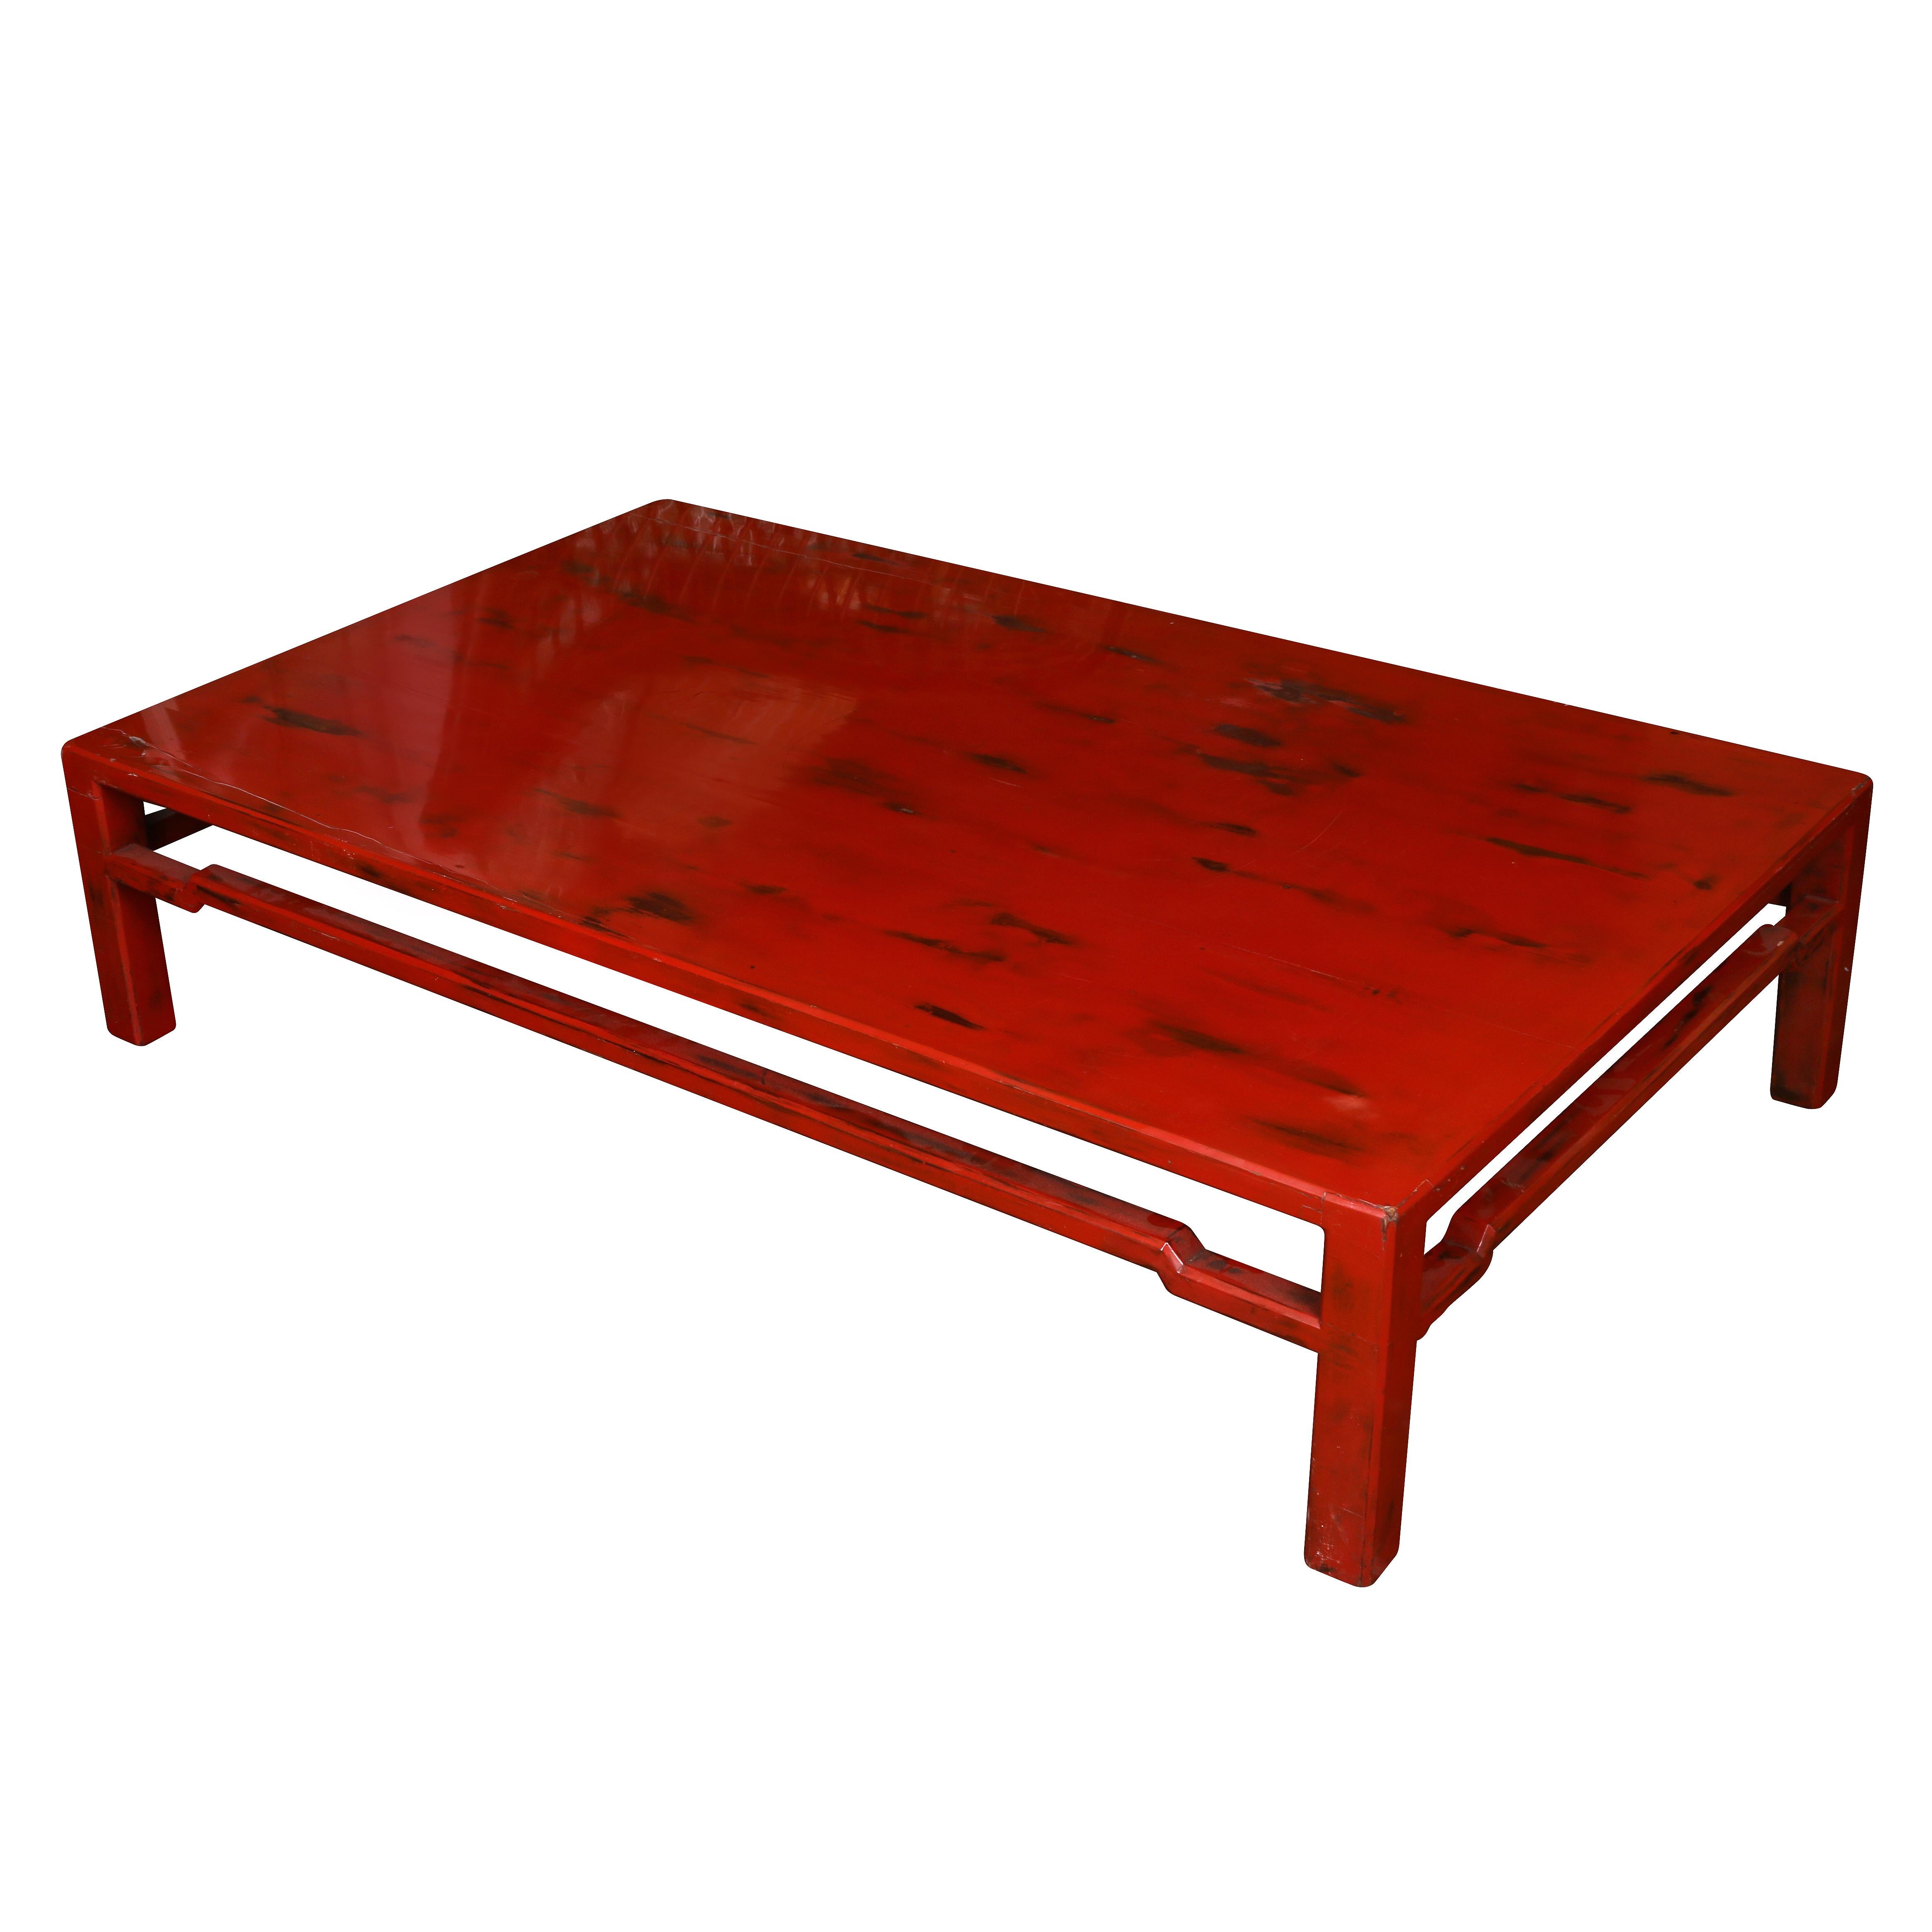 Chinese red lacquer cocktail table rubbed to give a distressed look.